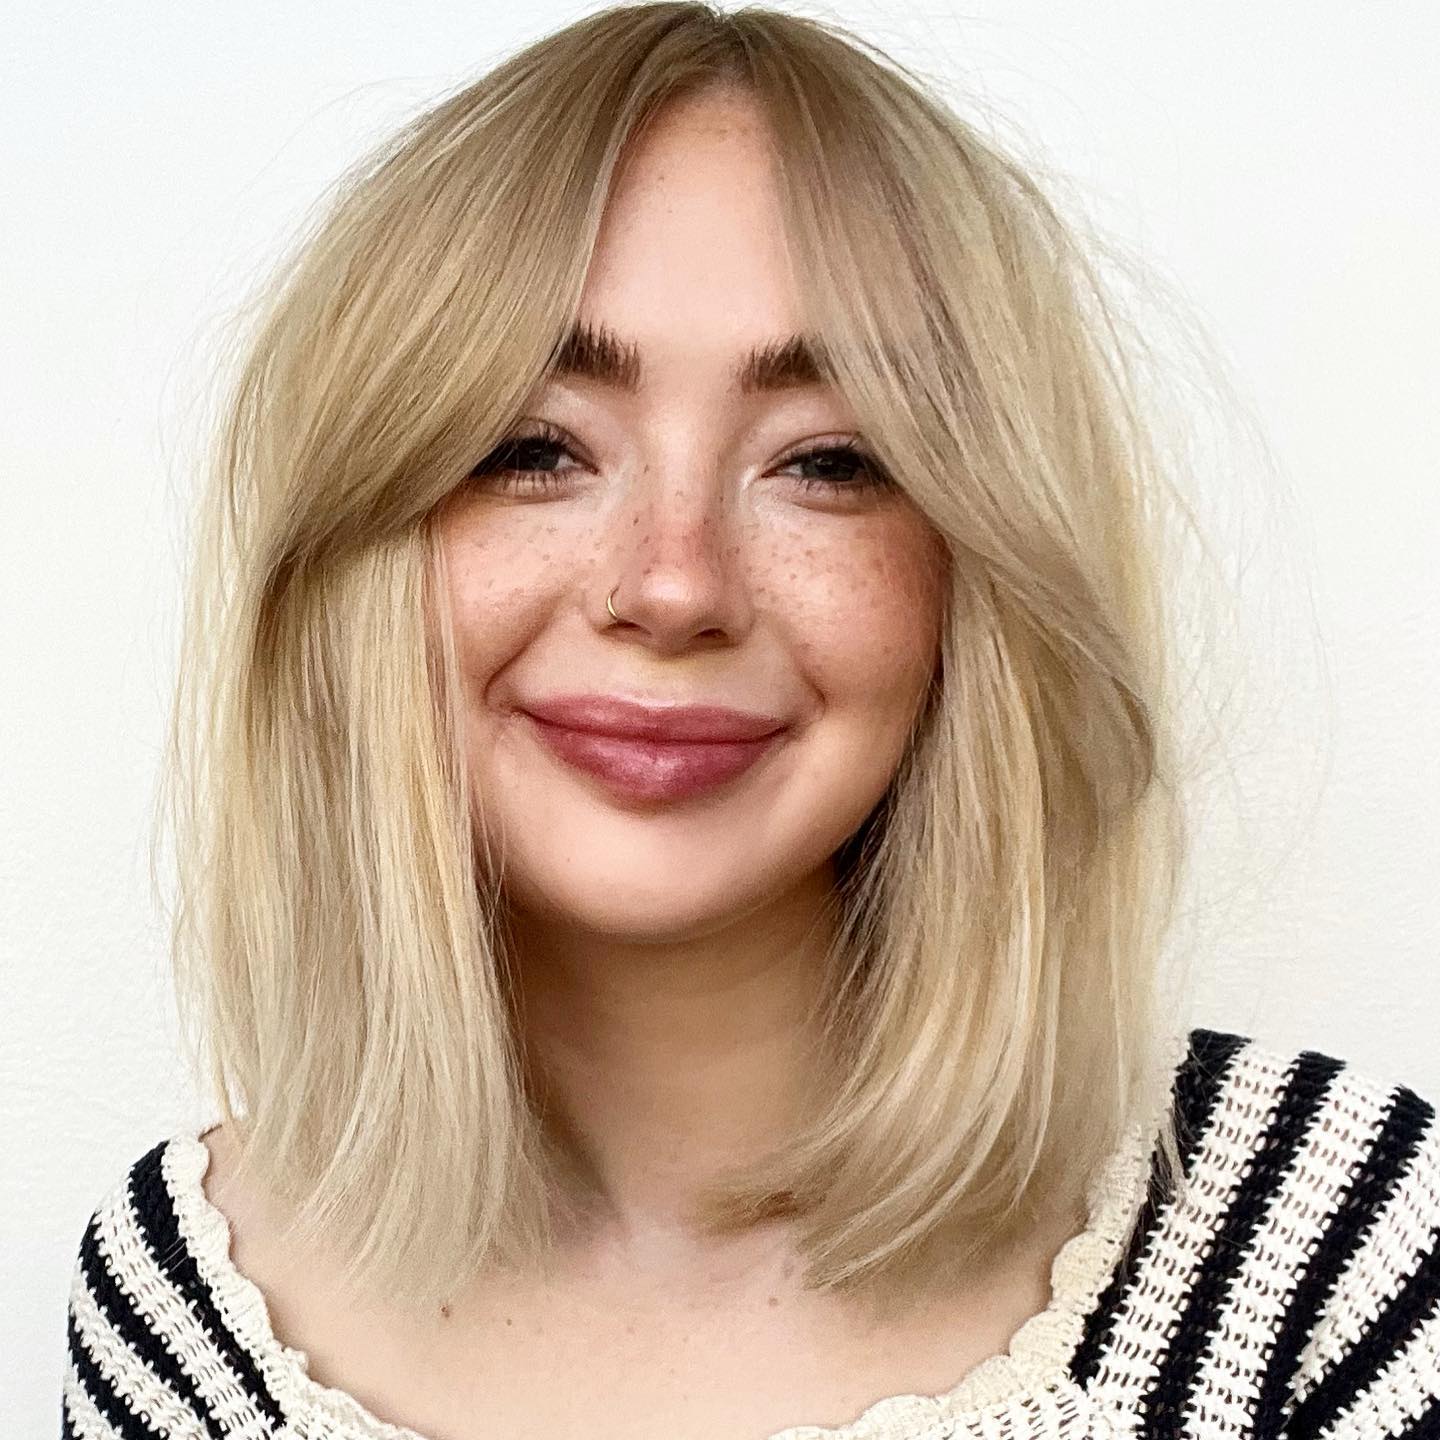 Bangs on two sides: 20 chic ways to add spice and charm to the image